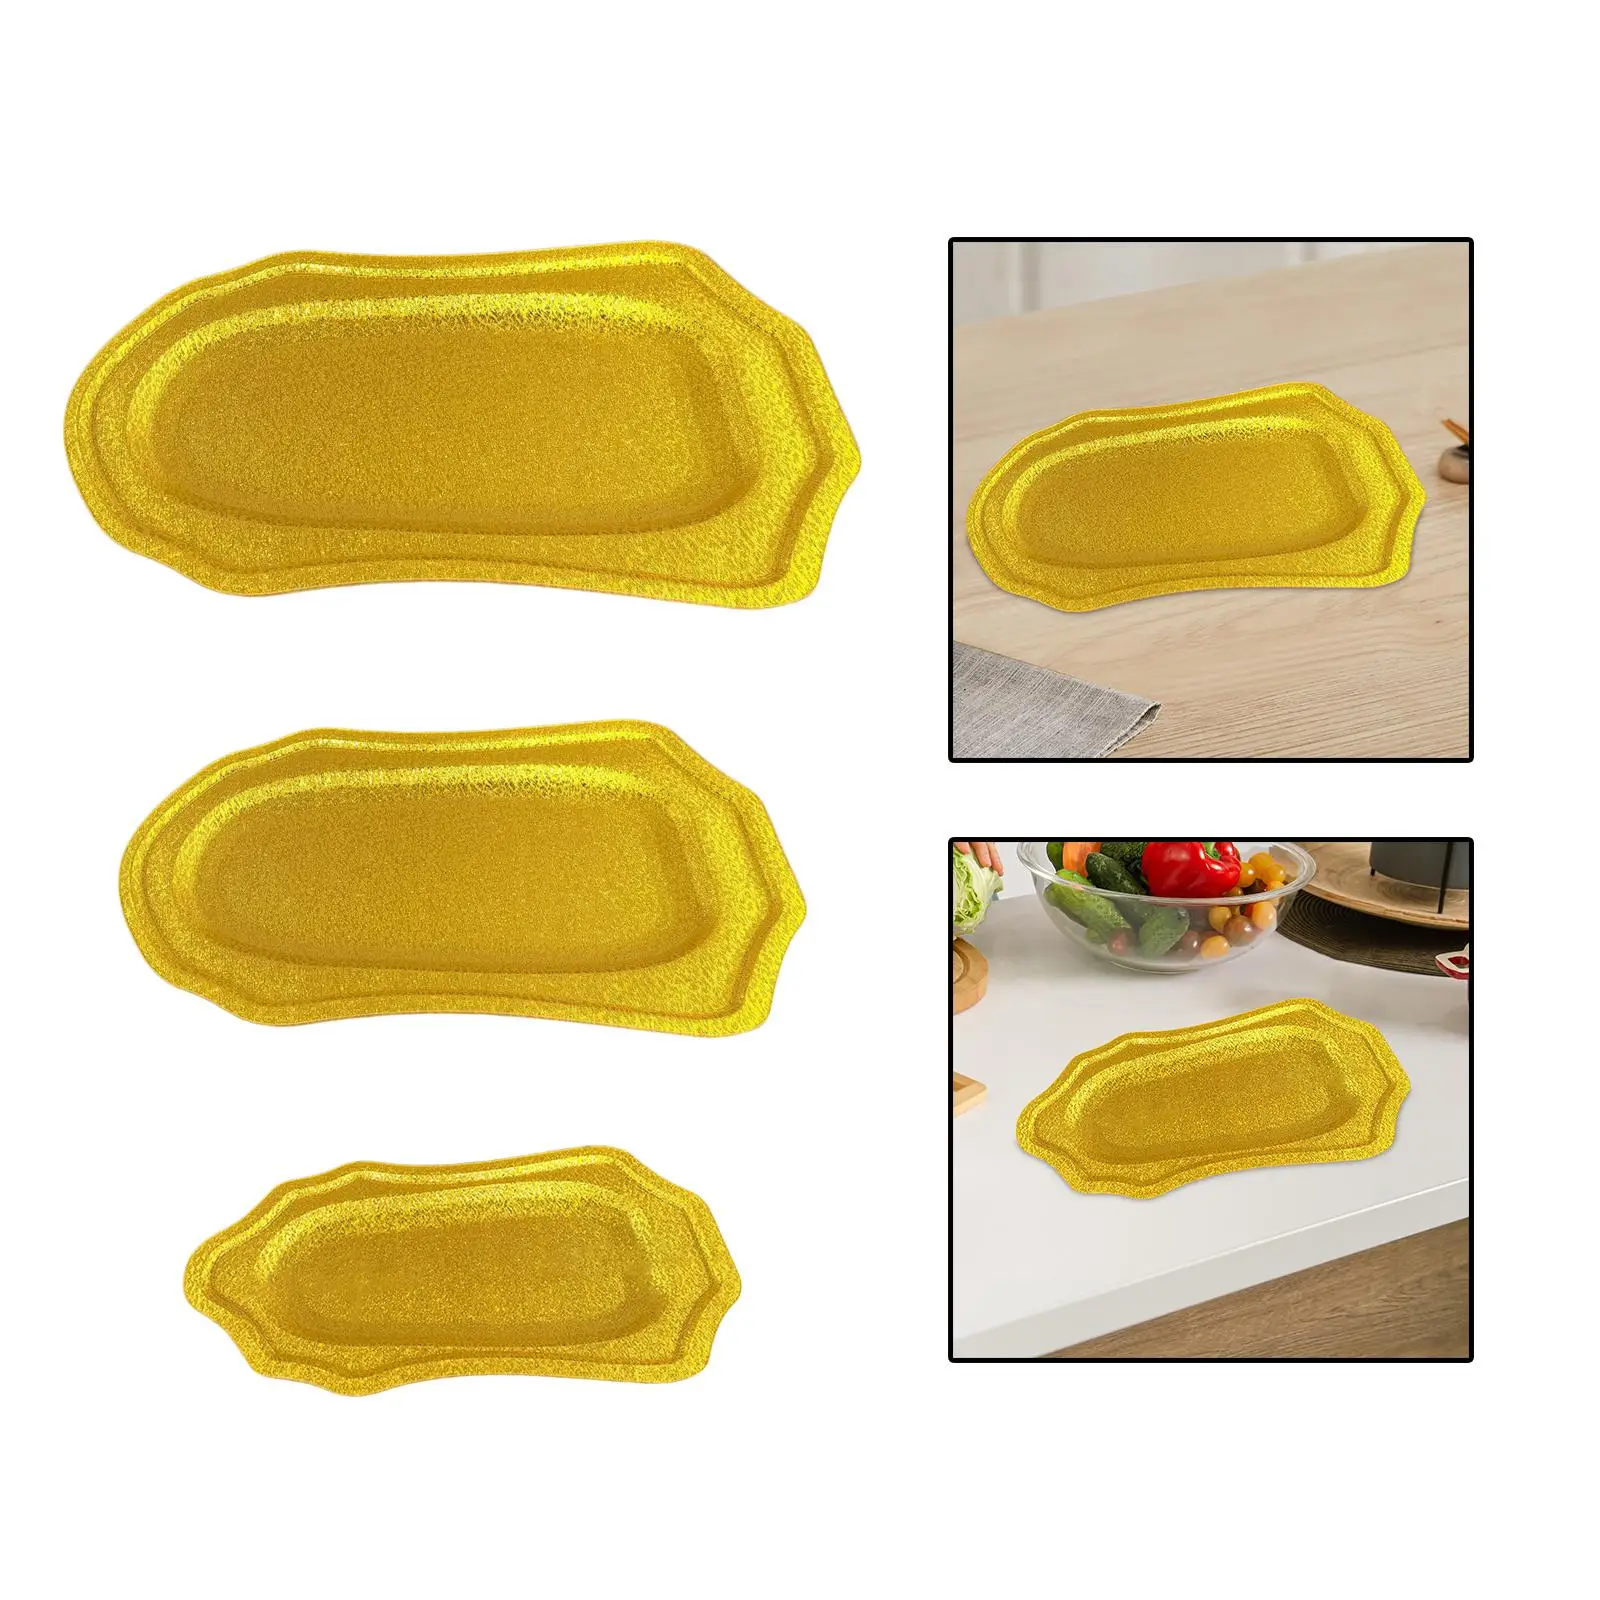 Salad Plate Reusable Kitchen Dinnerware Storage Tray Food Serving Plate Fruit Tray for Dinner Cookies Appetizer Party Outdoor